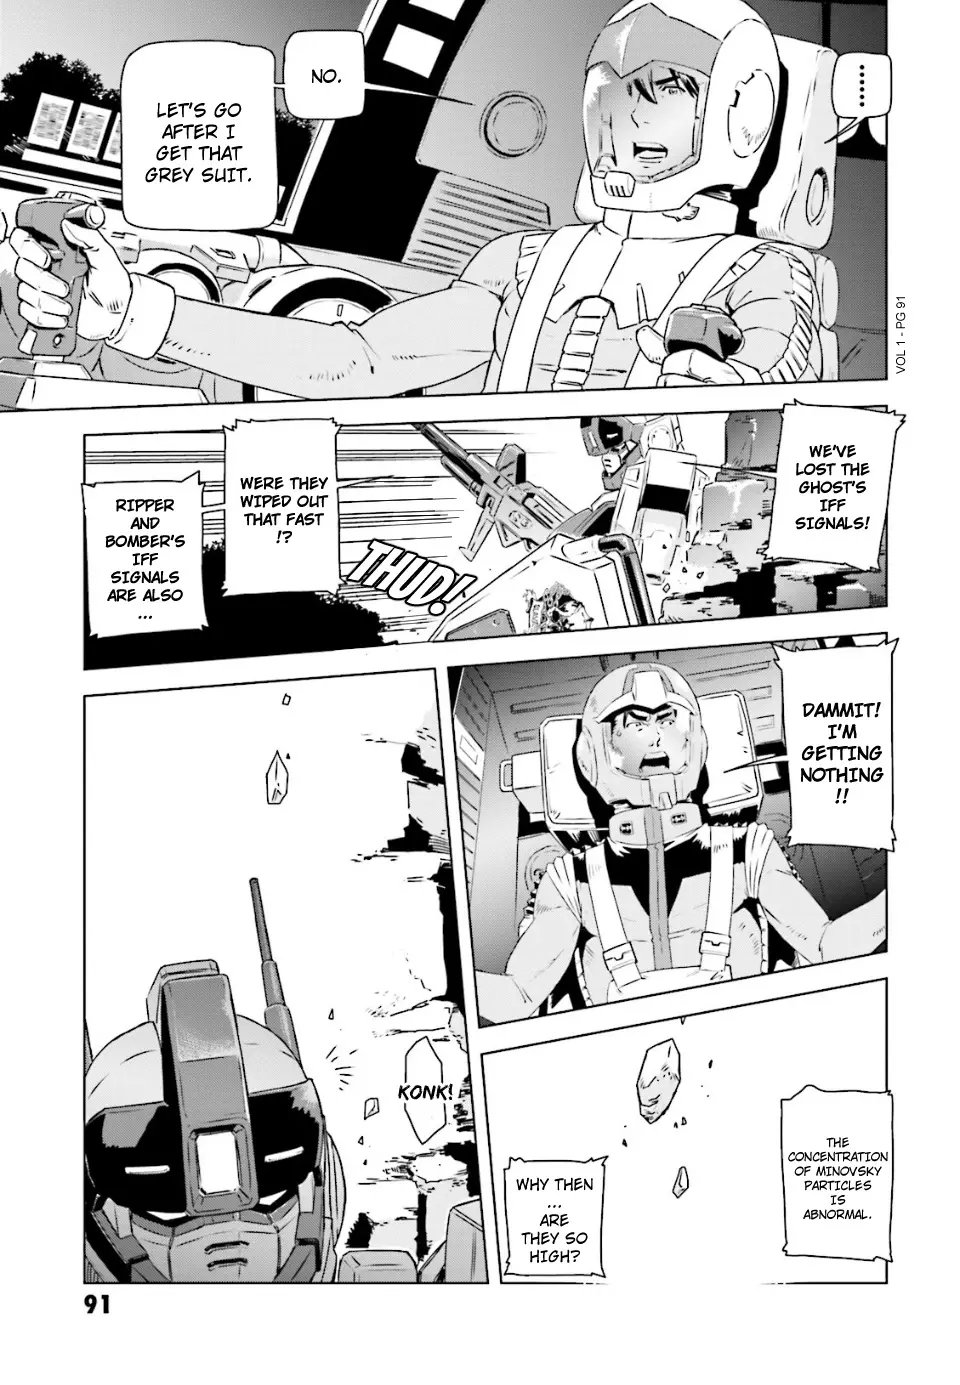 Mobile Suit Gundam Side Story - Missing Link - 3 page 24-f4c15361